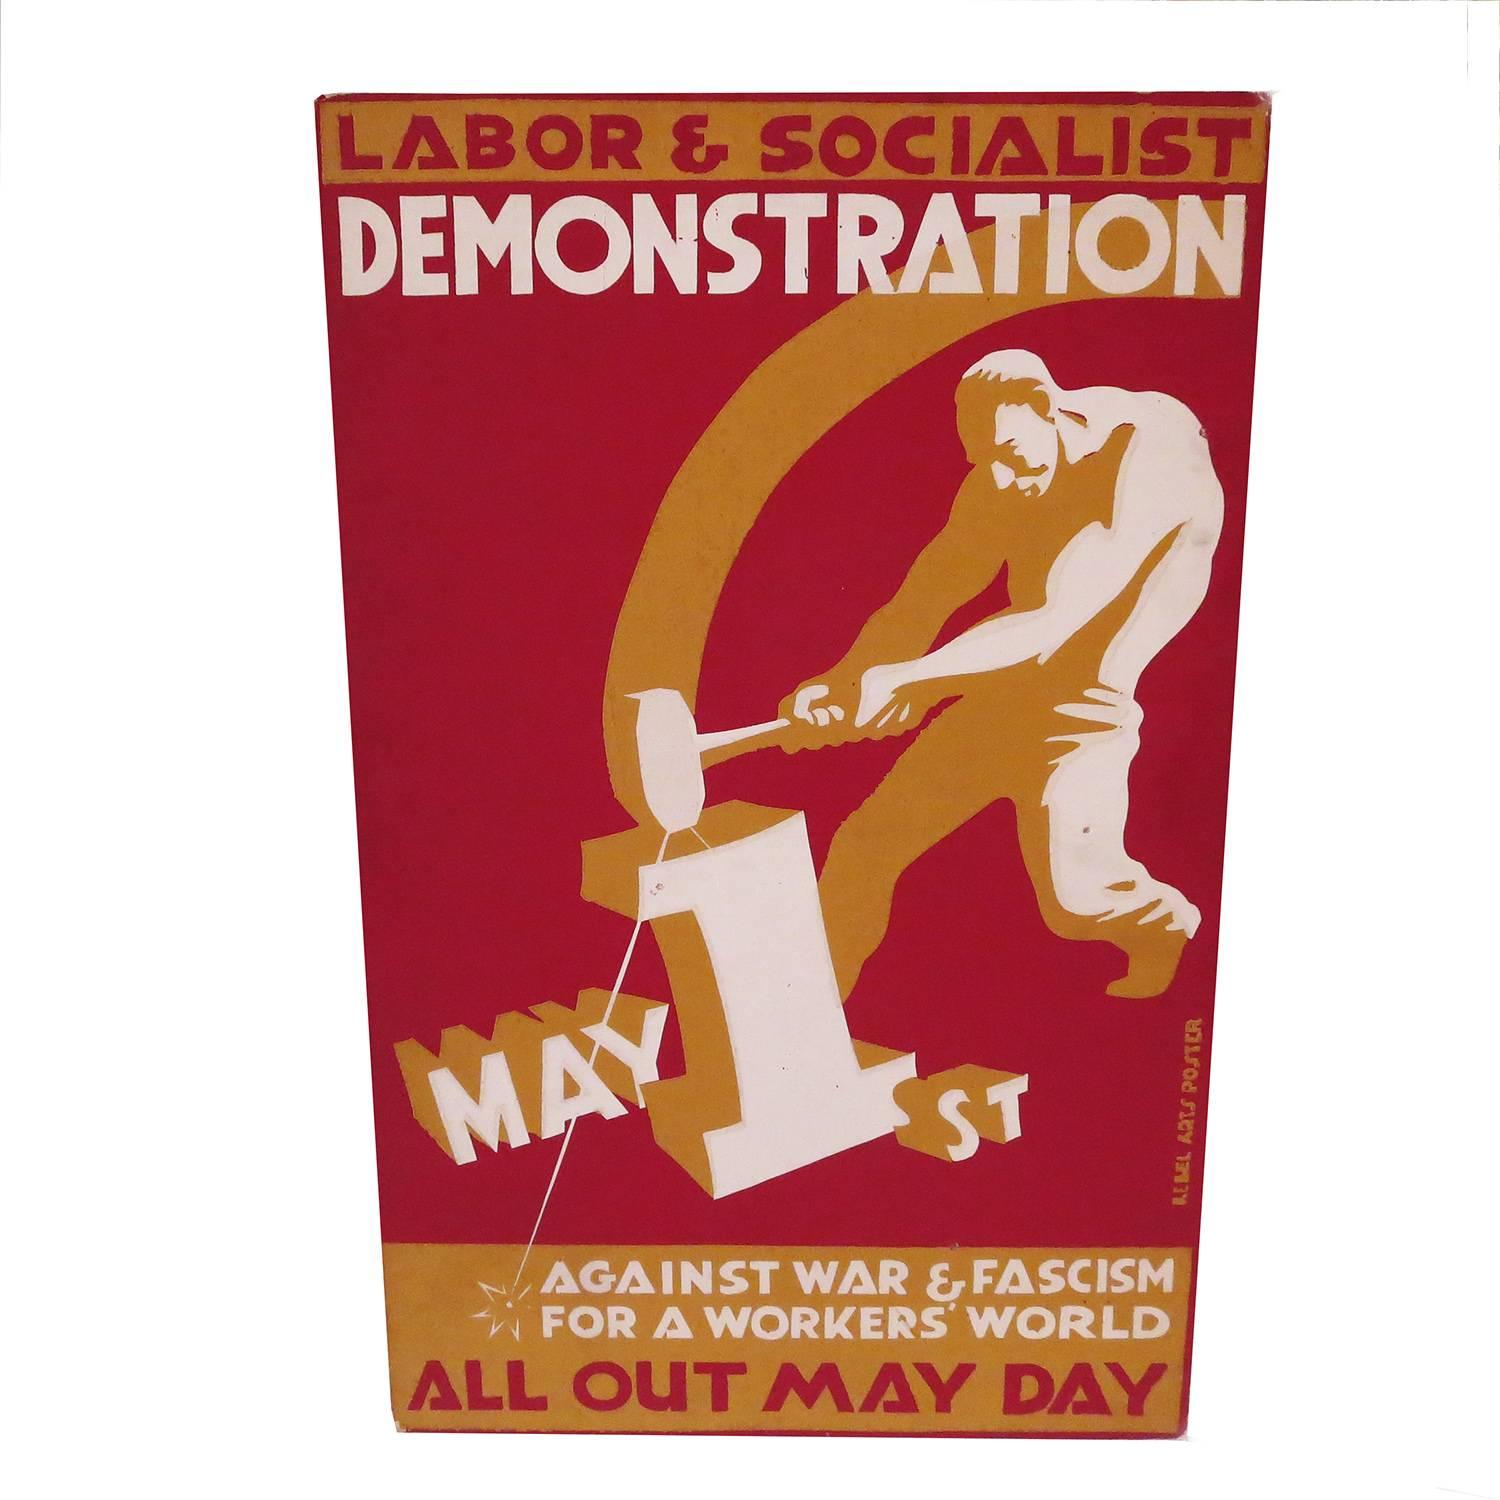 1930s Socialist May Day Demonstration Poster by Rebel Arts Group, New York